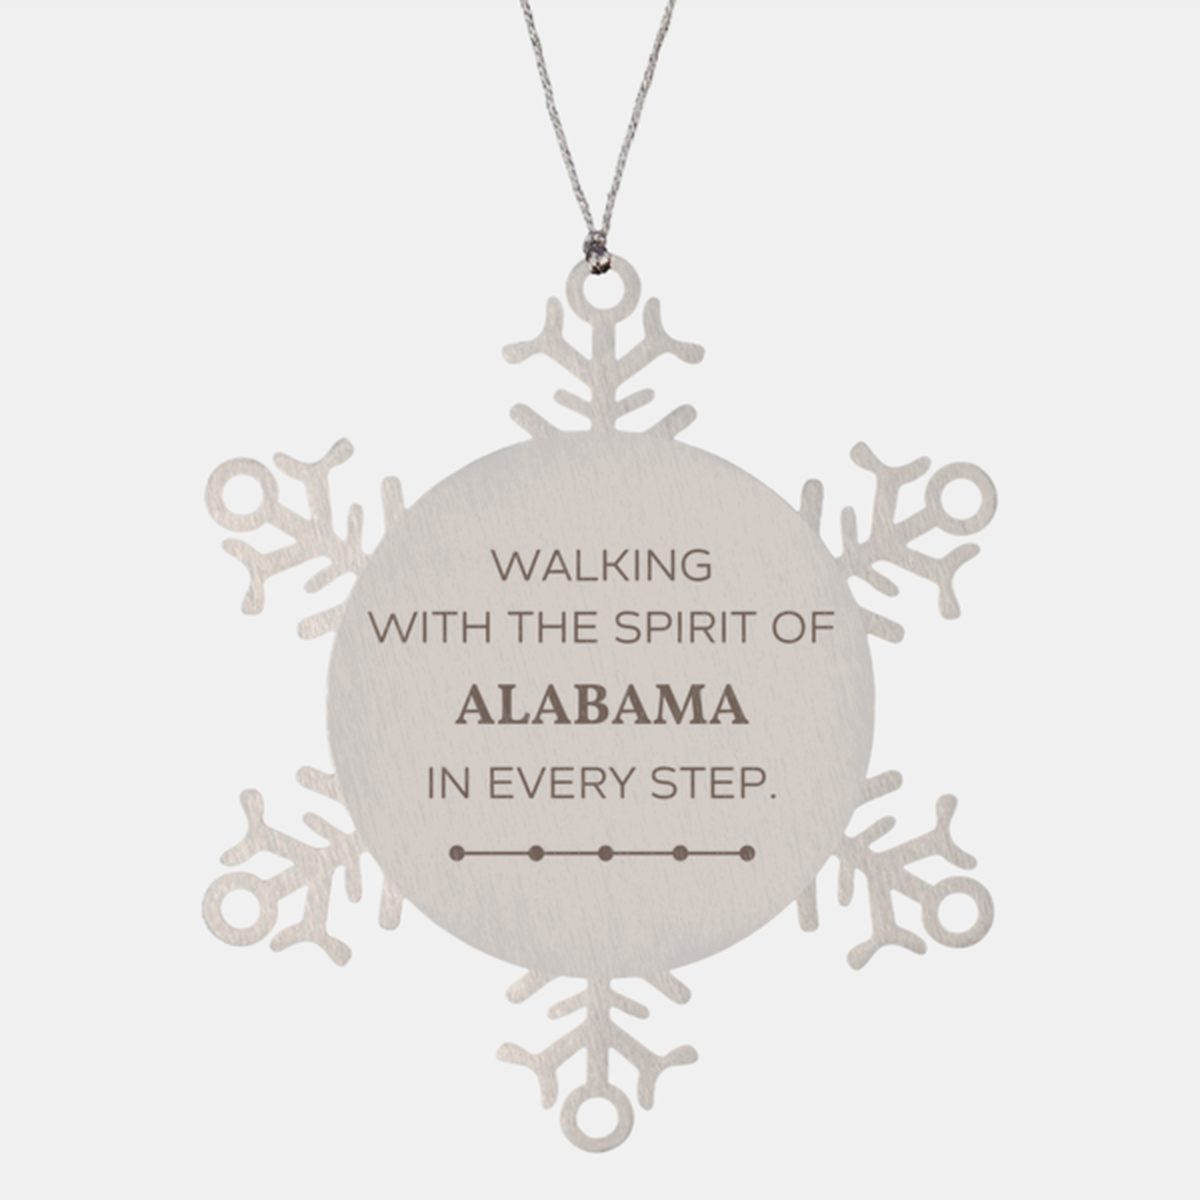 Alabama Gifts, Walking with the spirit, Love Alabama Birthday Christmas Snowflake Ornament For Alabama People, Men, Women, Friends